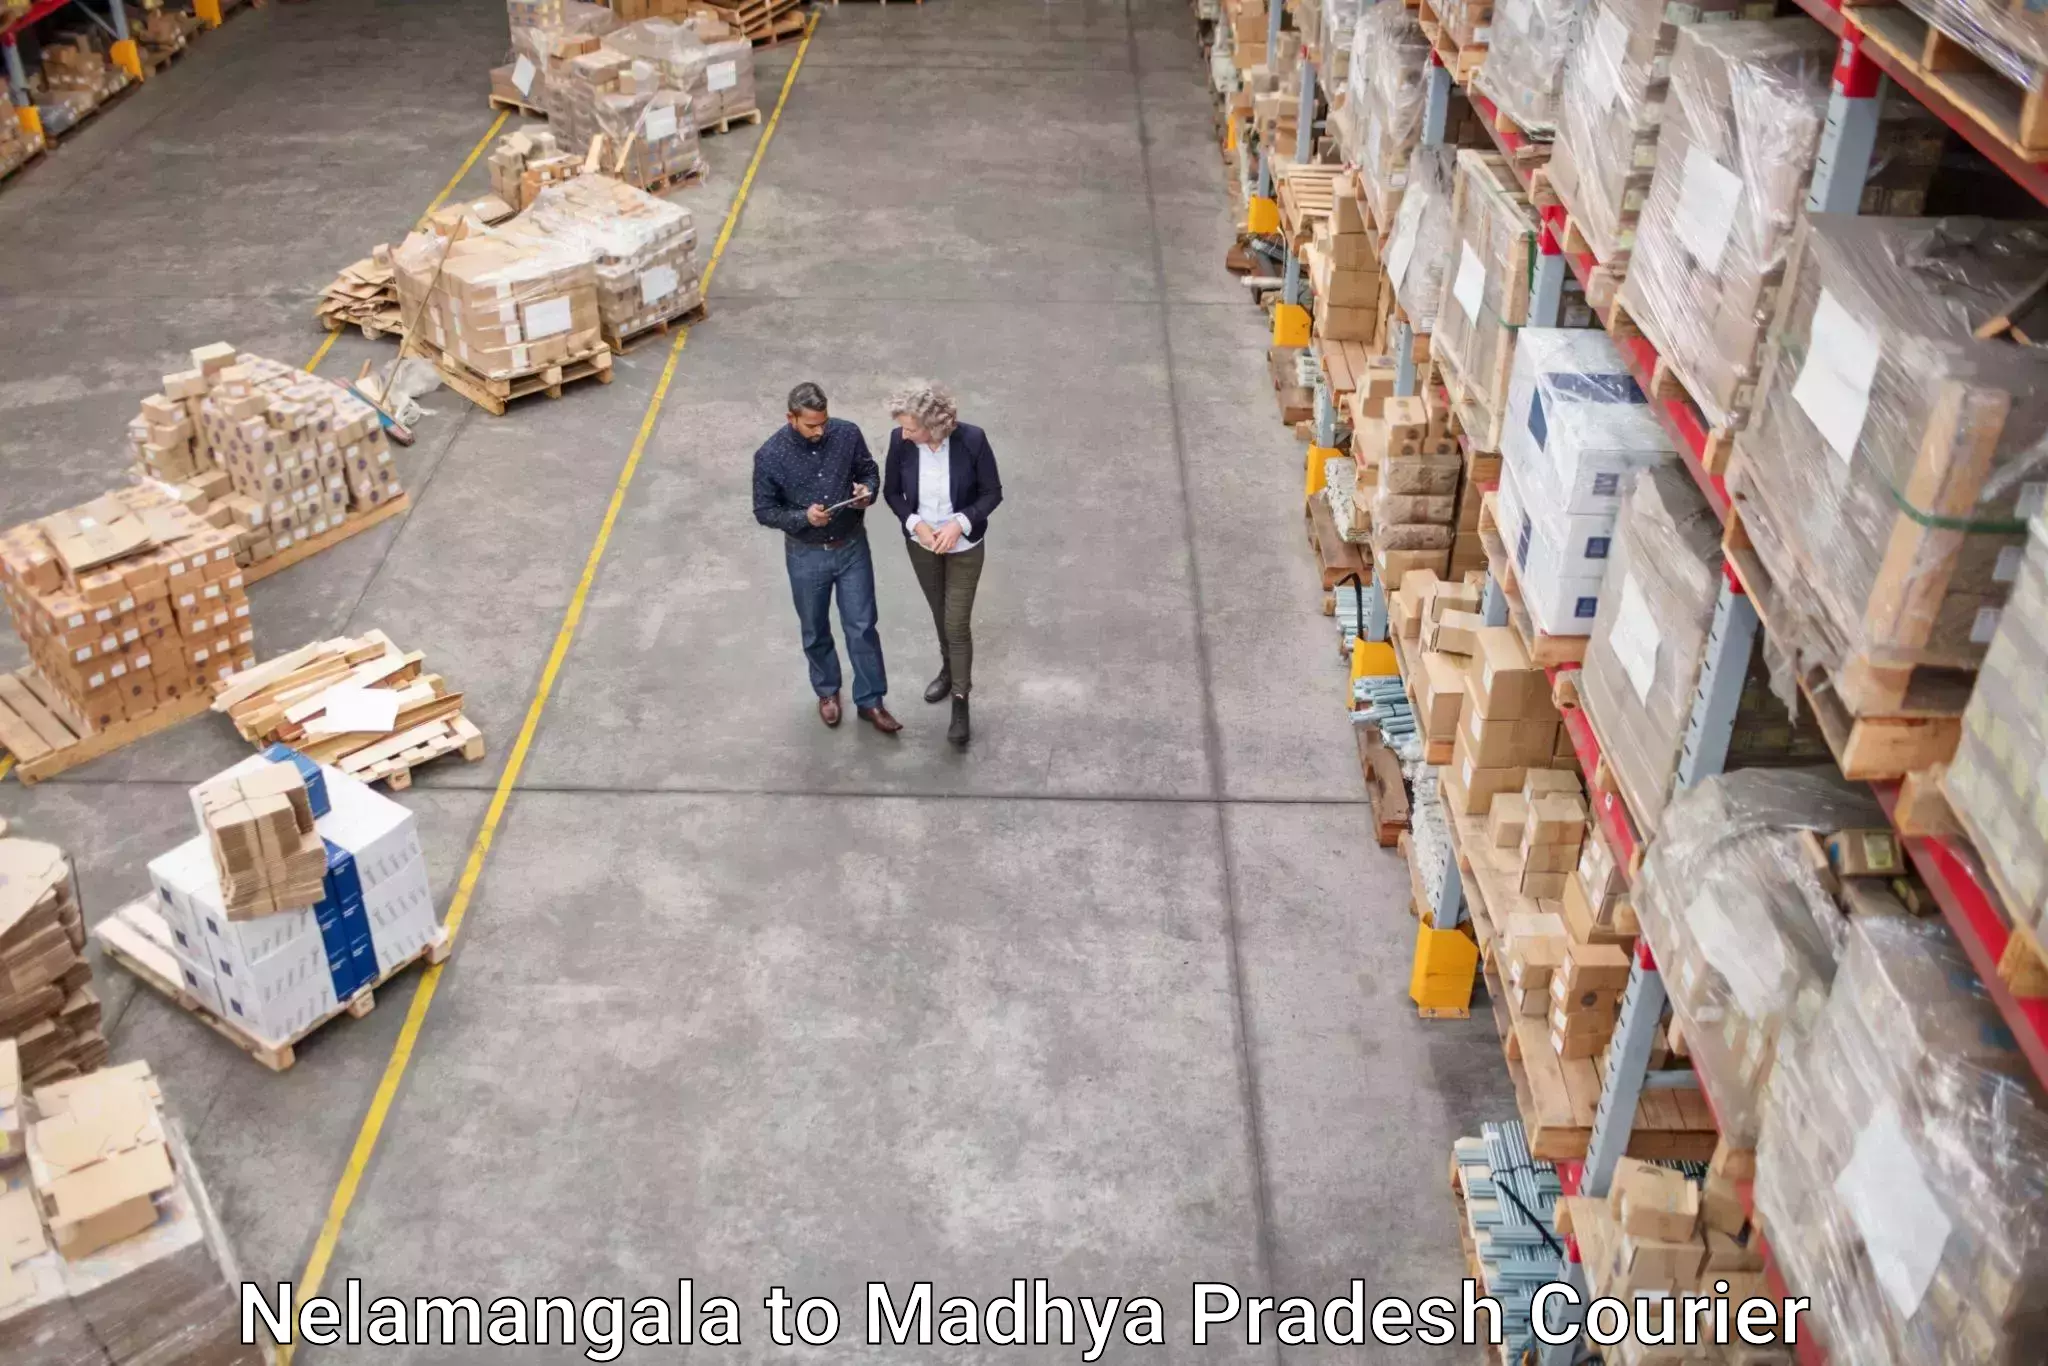 Global courier networks Nelamangala to Deosar